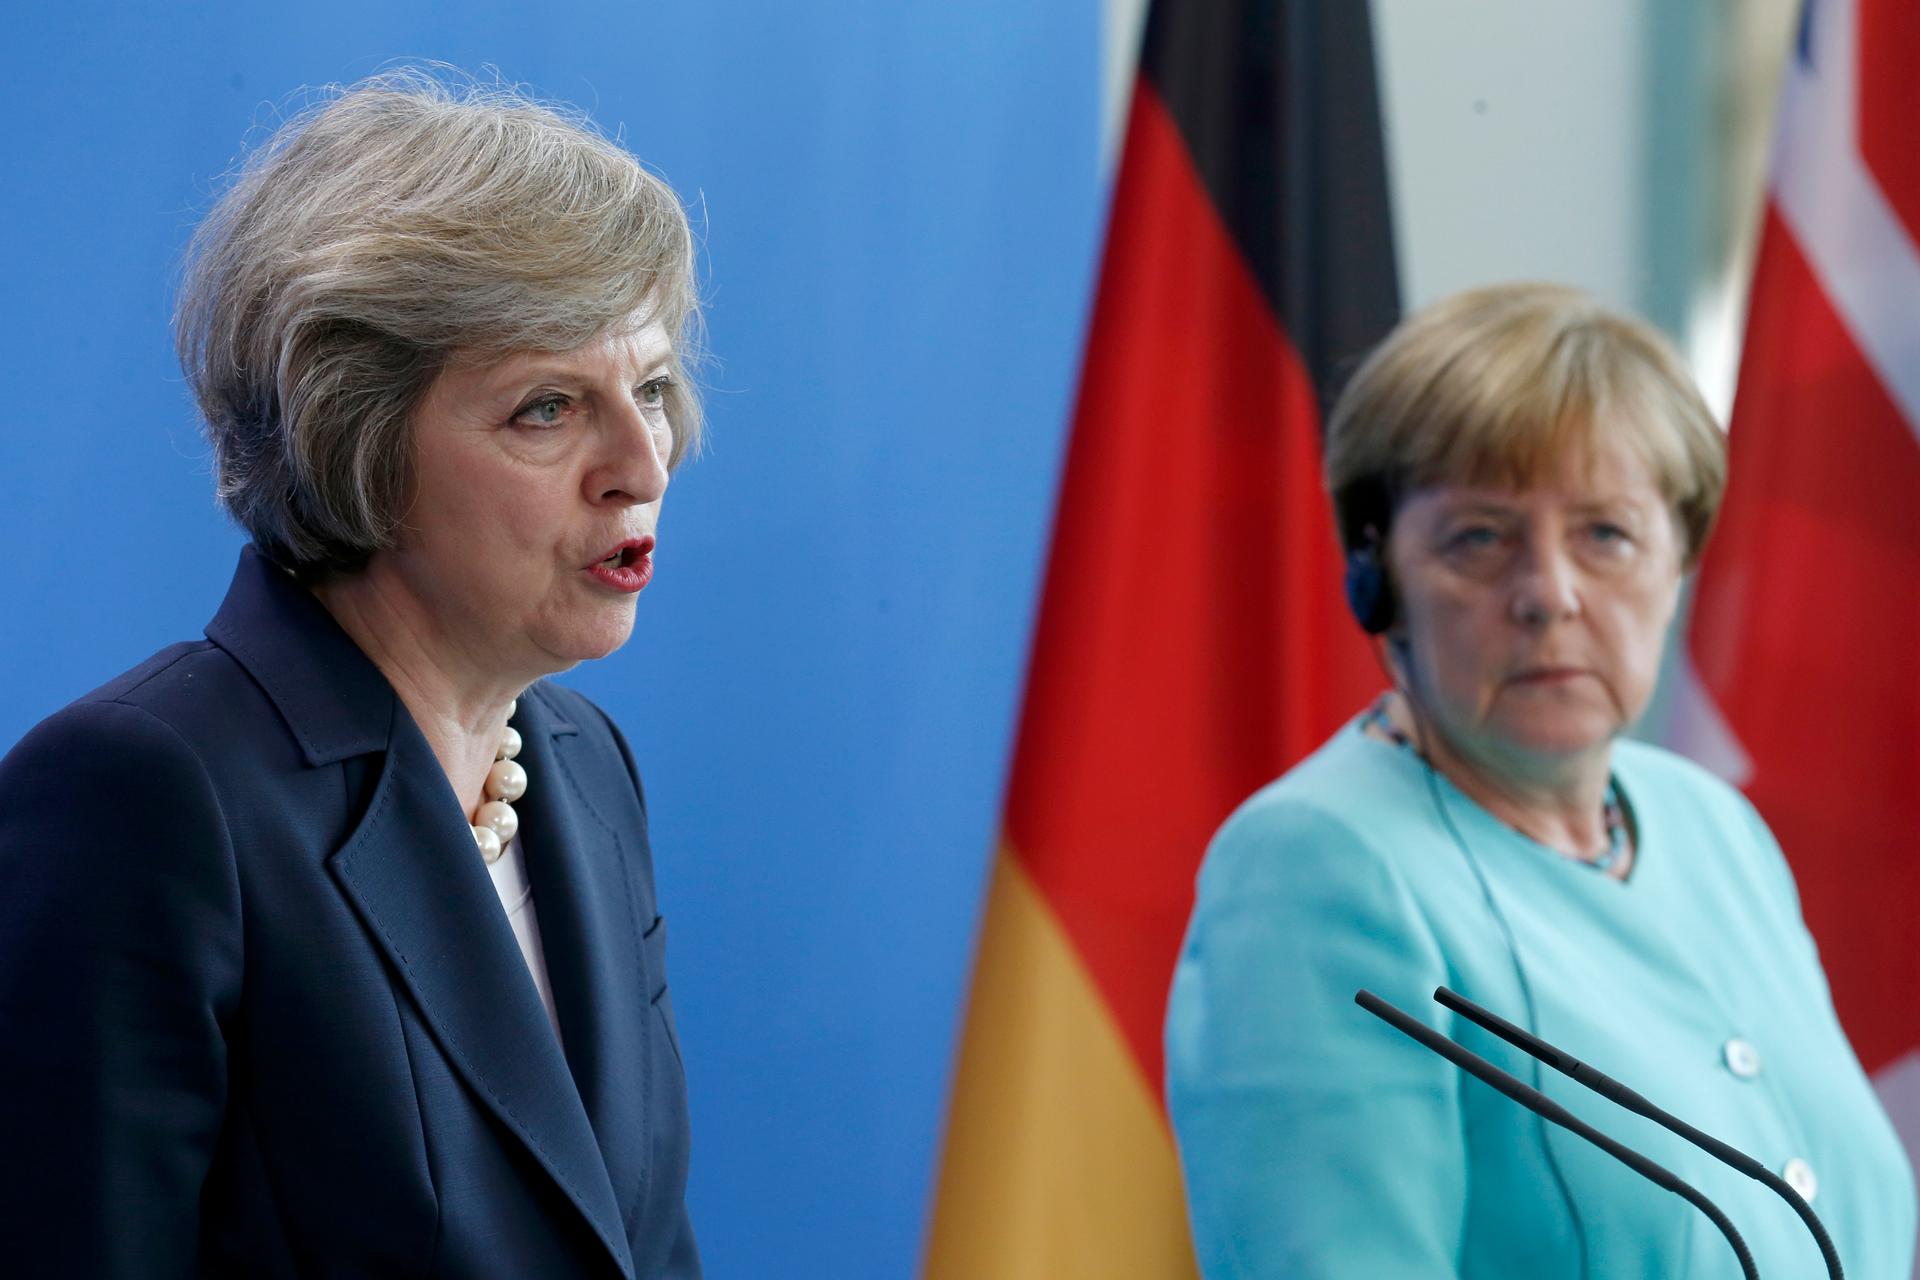 German Chancellor Angela Merkel and British Prime Minister Theresa May address a news conference following talks at the Chancellery in Berlin, Germany July 20, 2016.